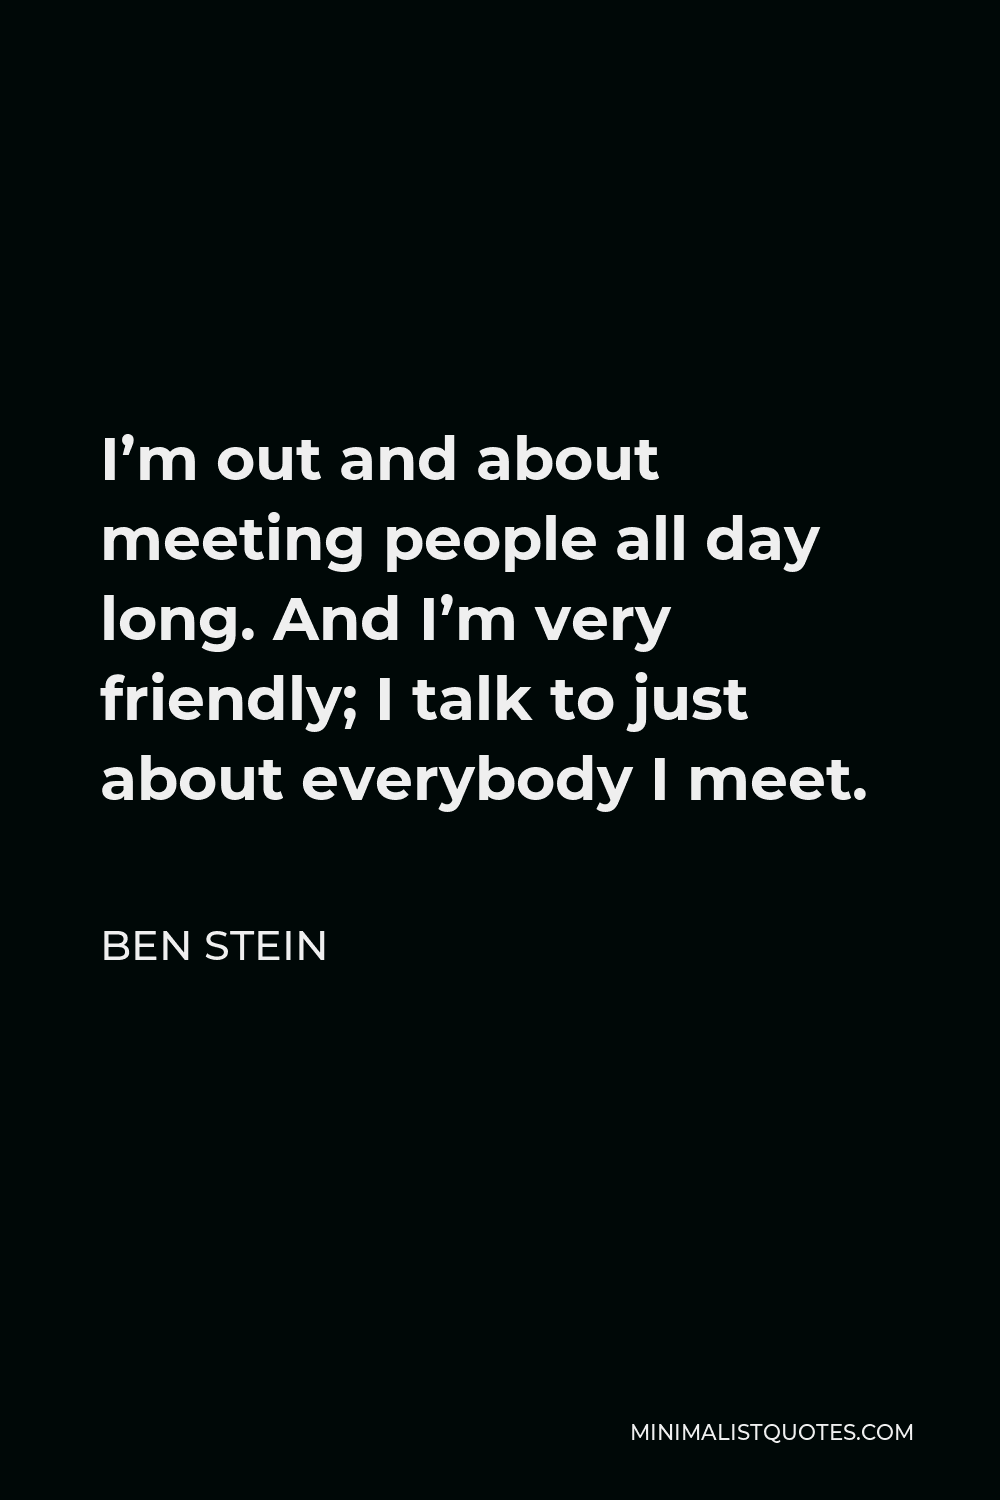 Ben Stein Quote - I’m out and about meeting people all day long. And I’m very friendly; I talk to just about everybody I meet.